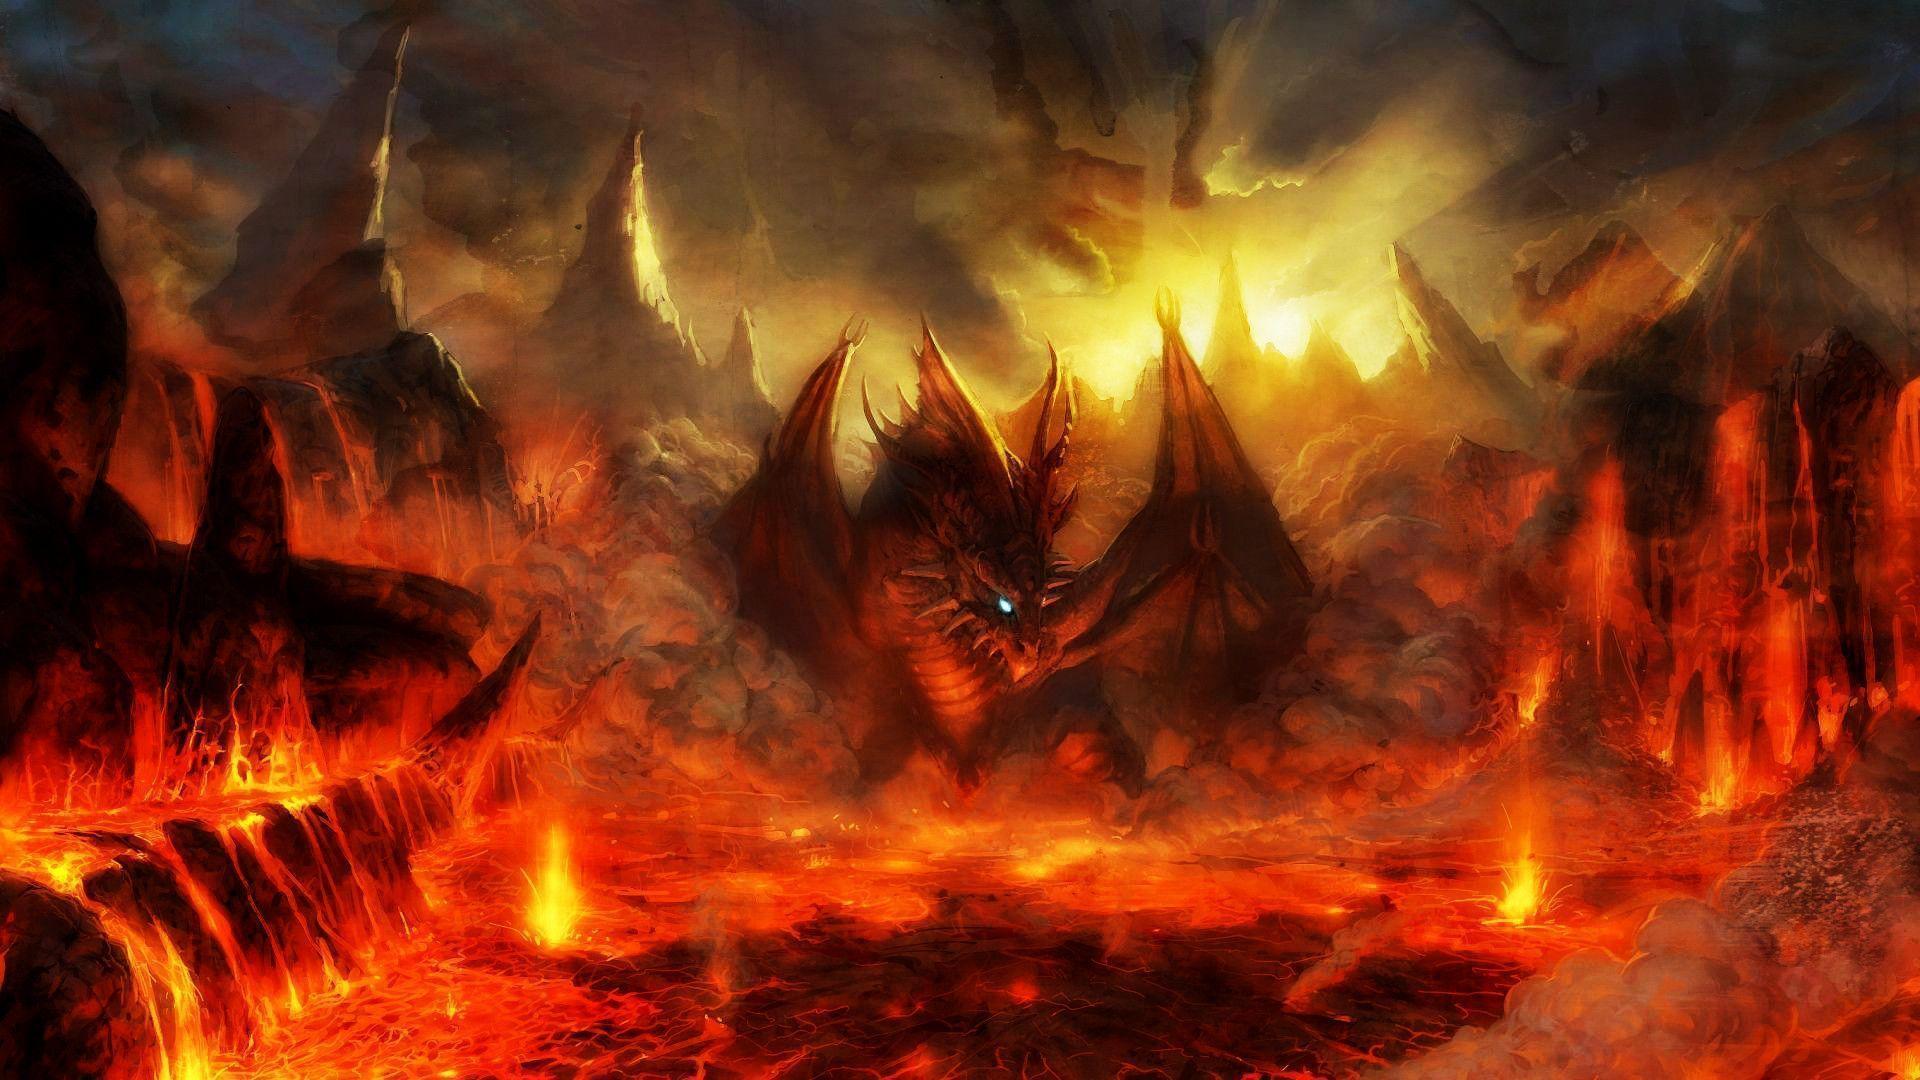 Free Wallpaper in the flame of hell 1920x1080 wallpaper